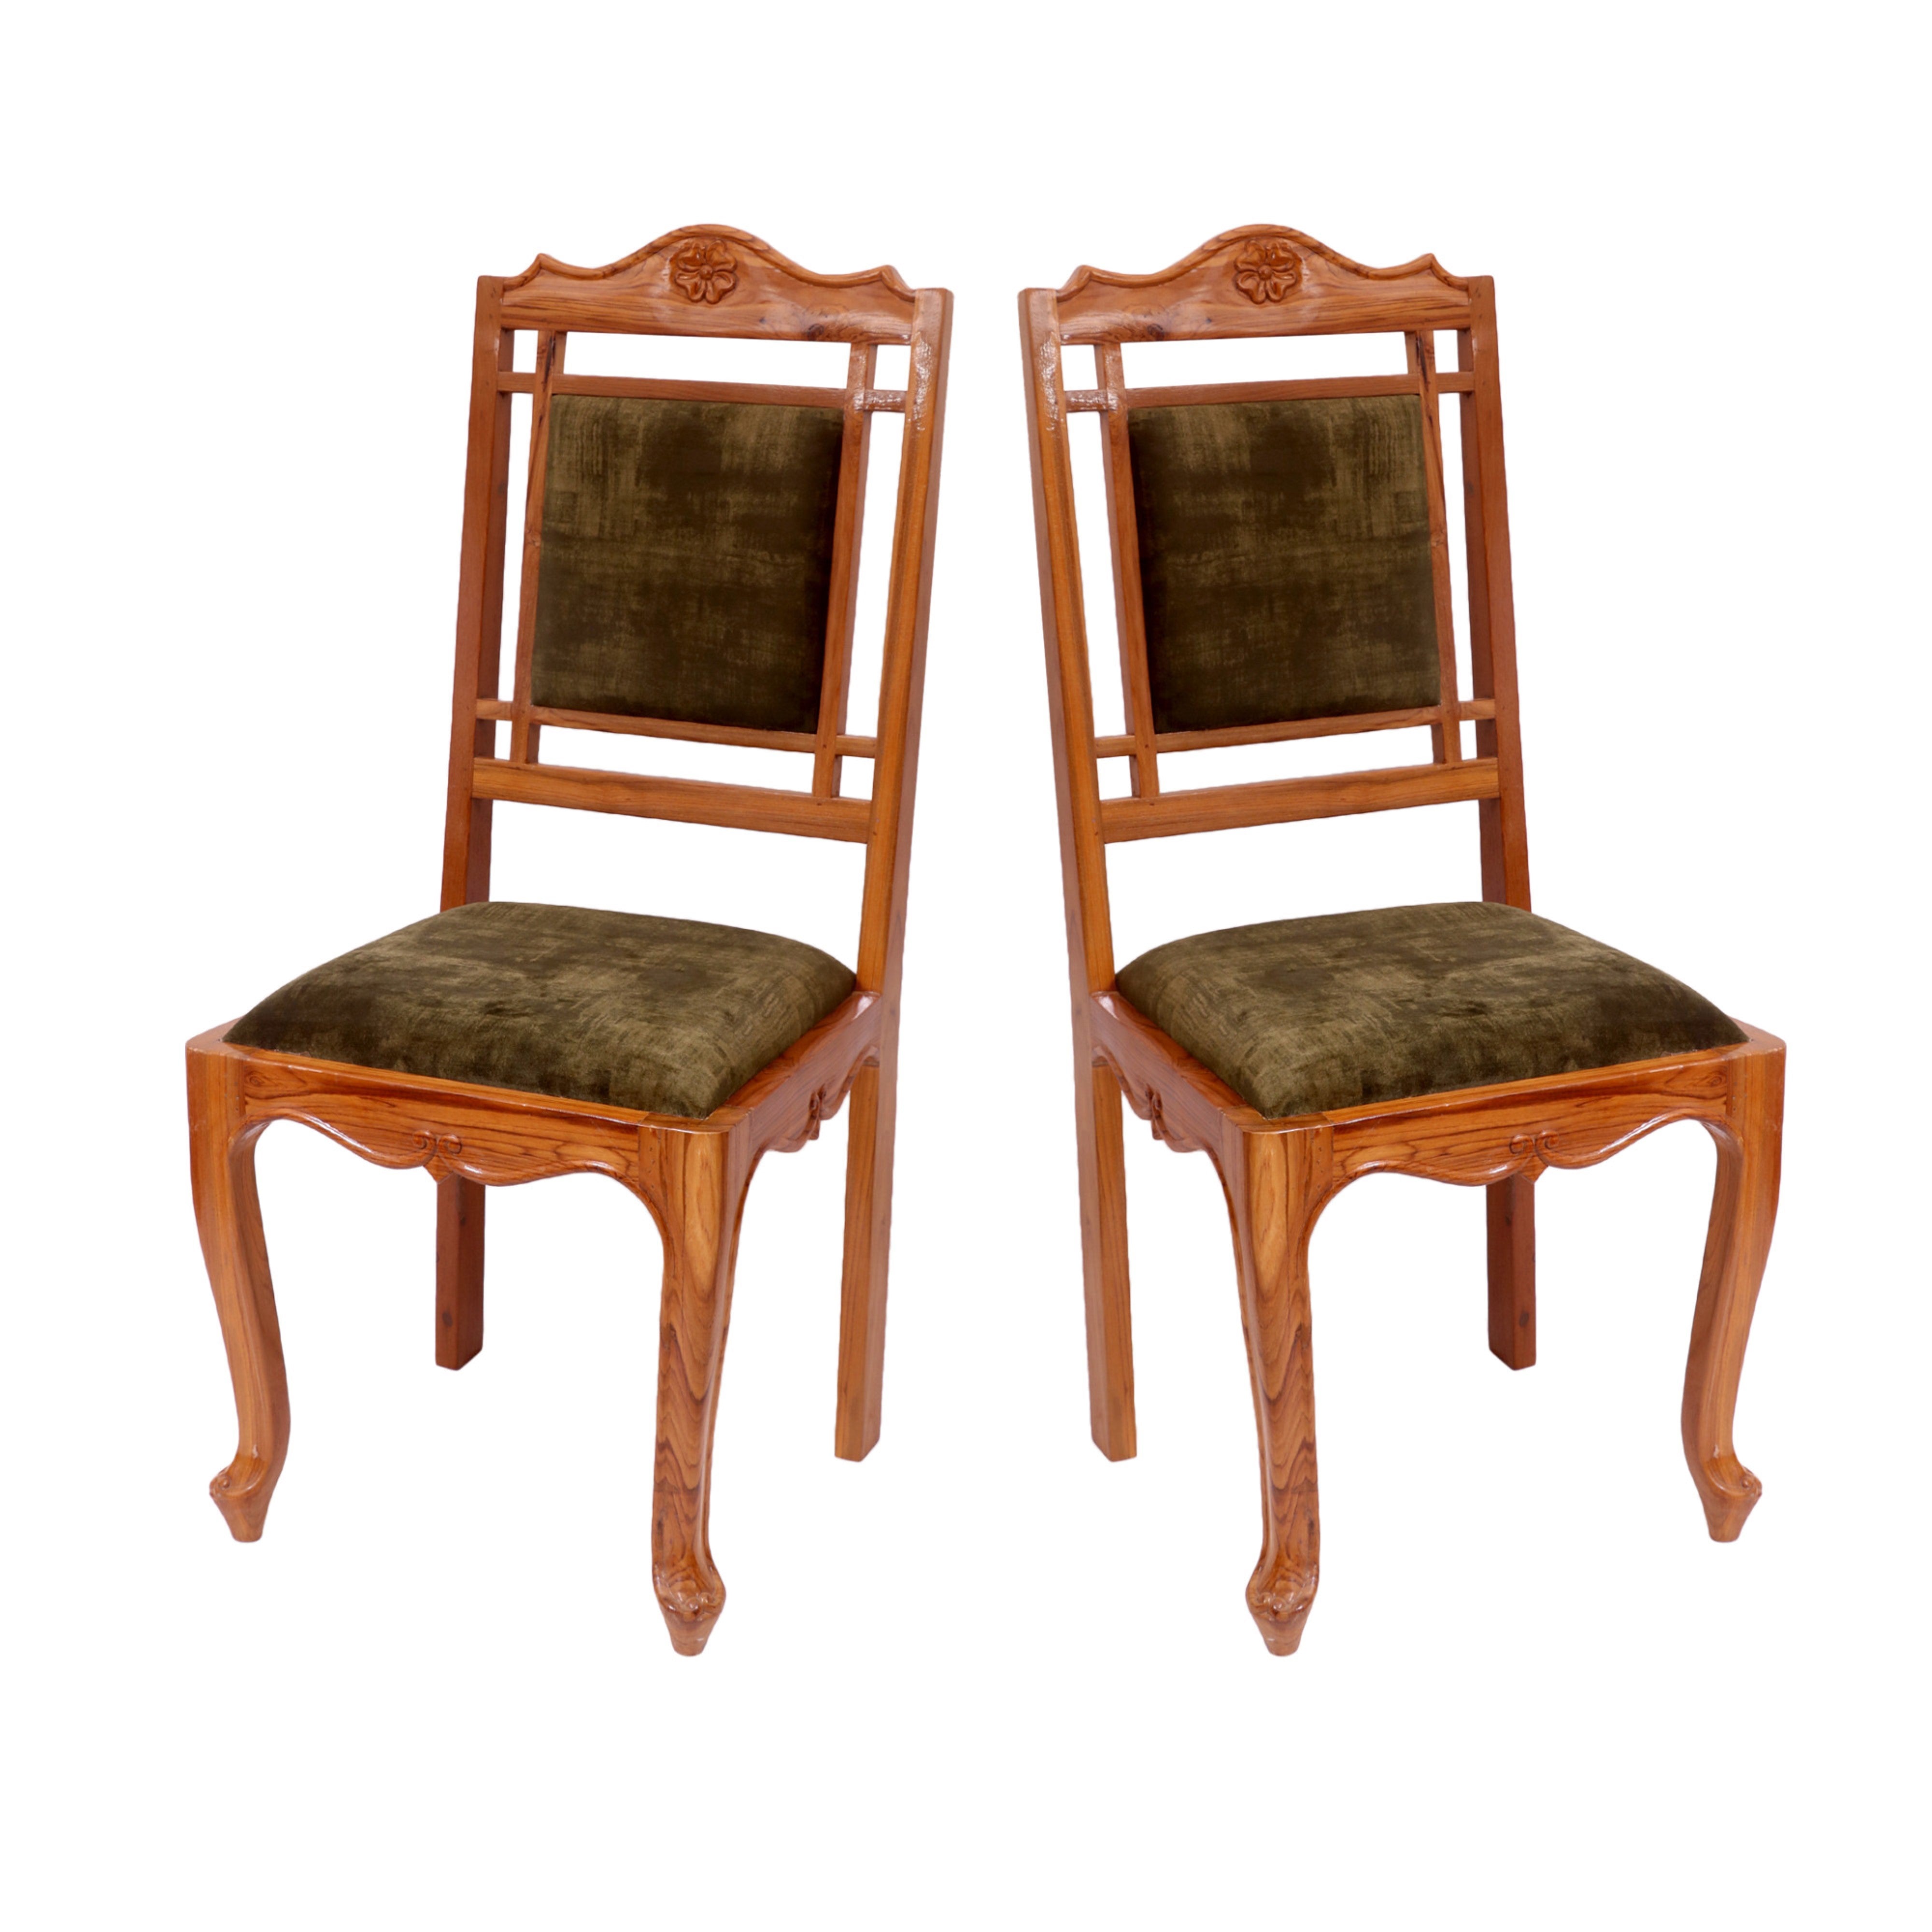 (Set of 2) Teak Wood Traditional Dinning office all purpose Chair henna color Dining Chair